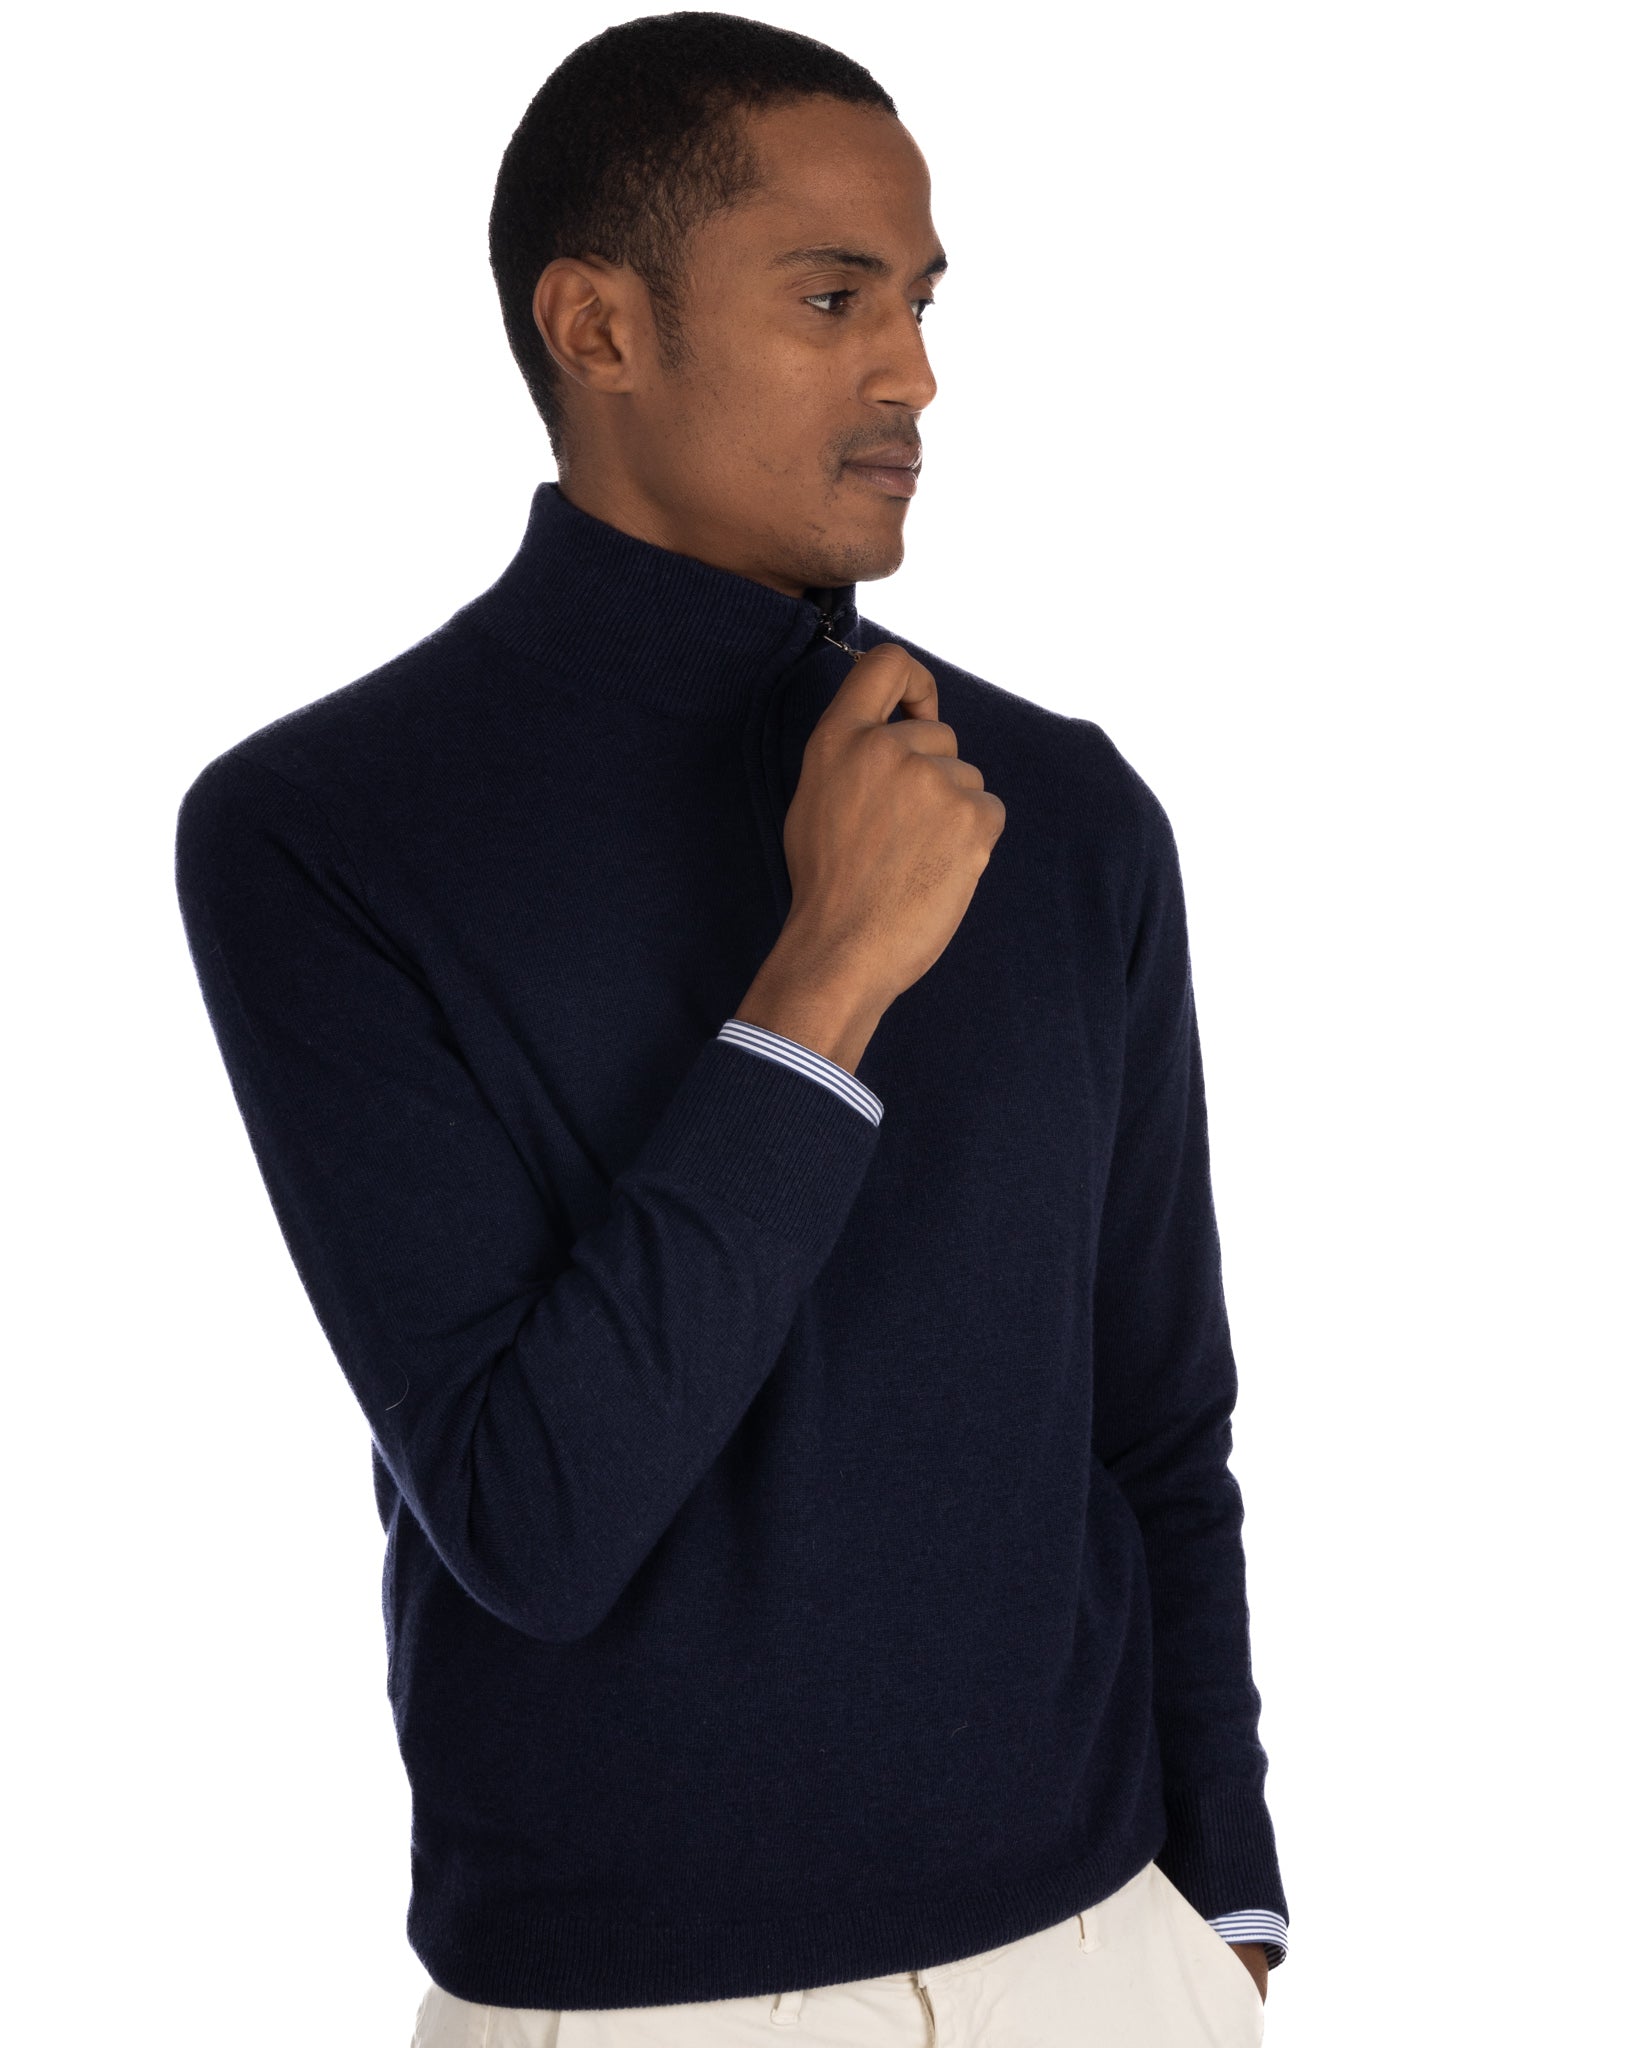 Rory - blue cashmere blend zip sweater